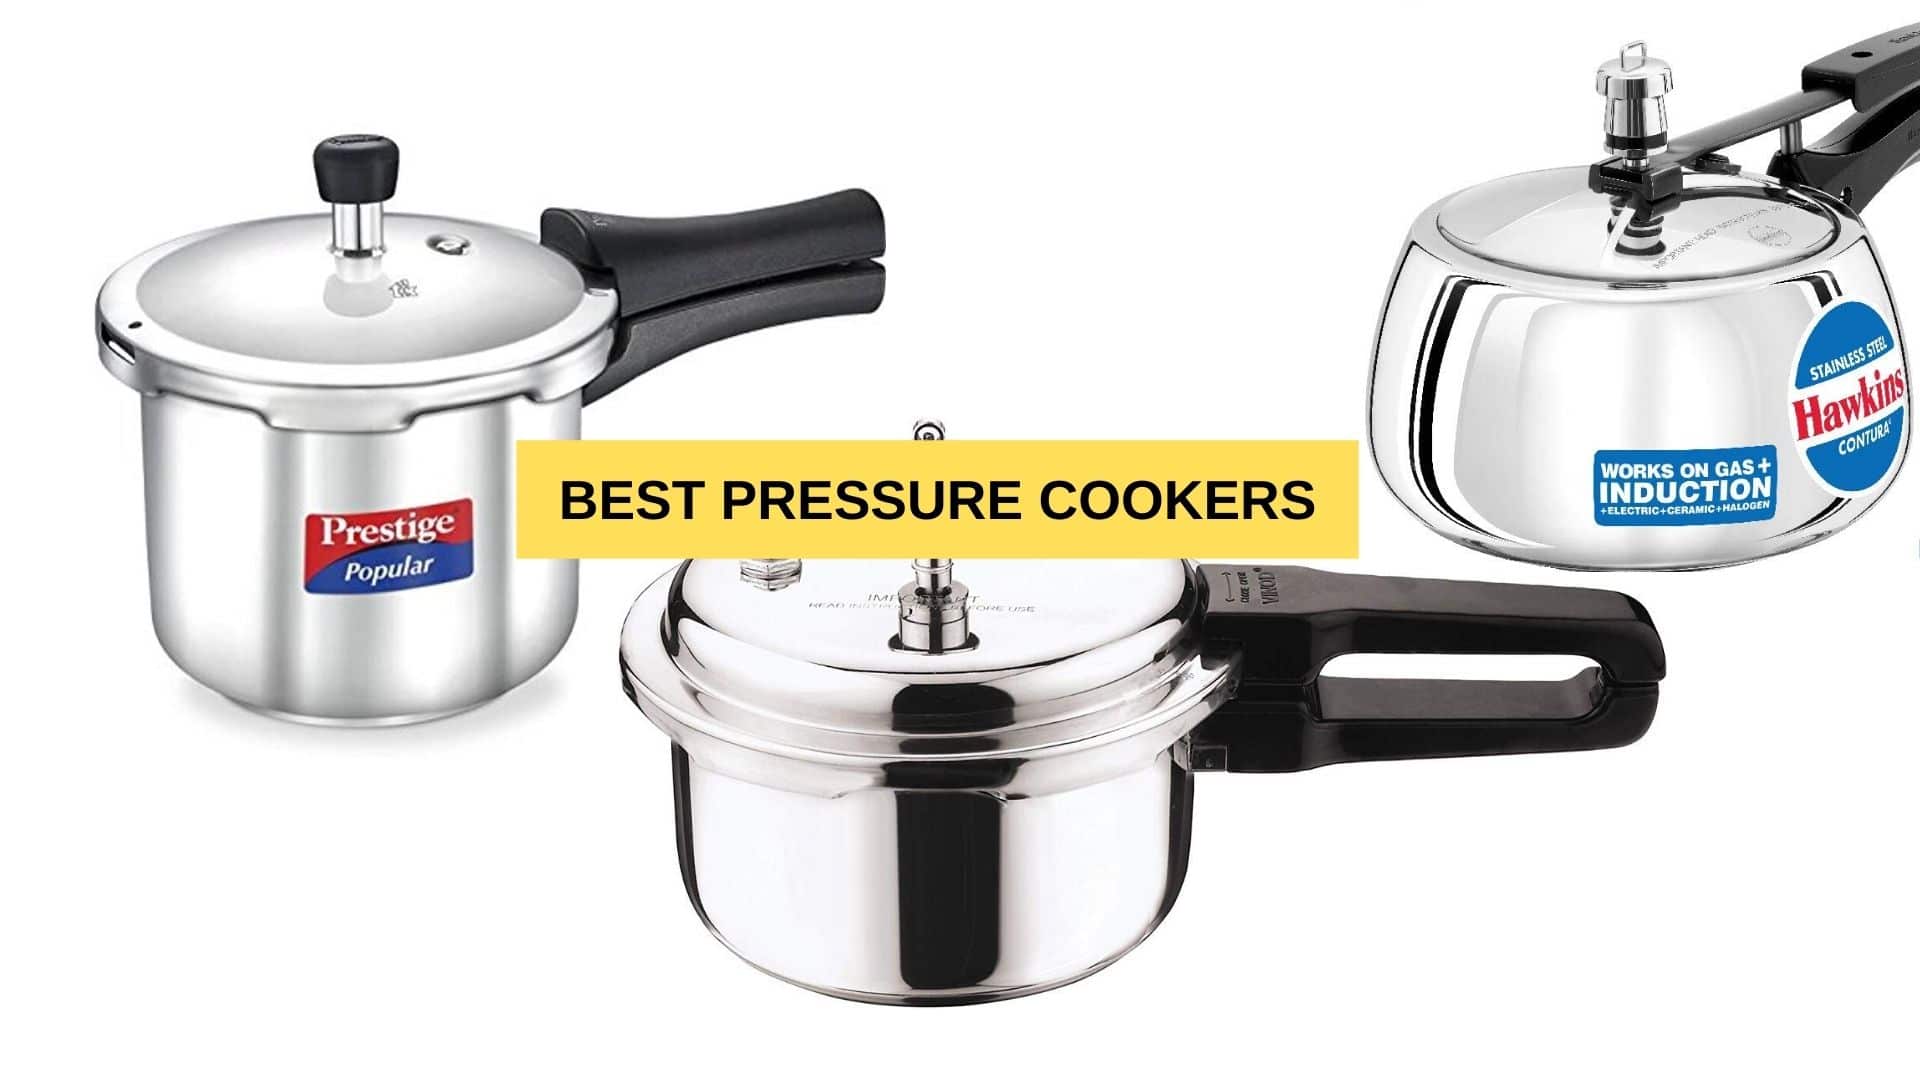 Best Stainless Steel Pressure Cooker For Students Mishry Reviews,How To Cook Pork Loin Steaks